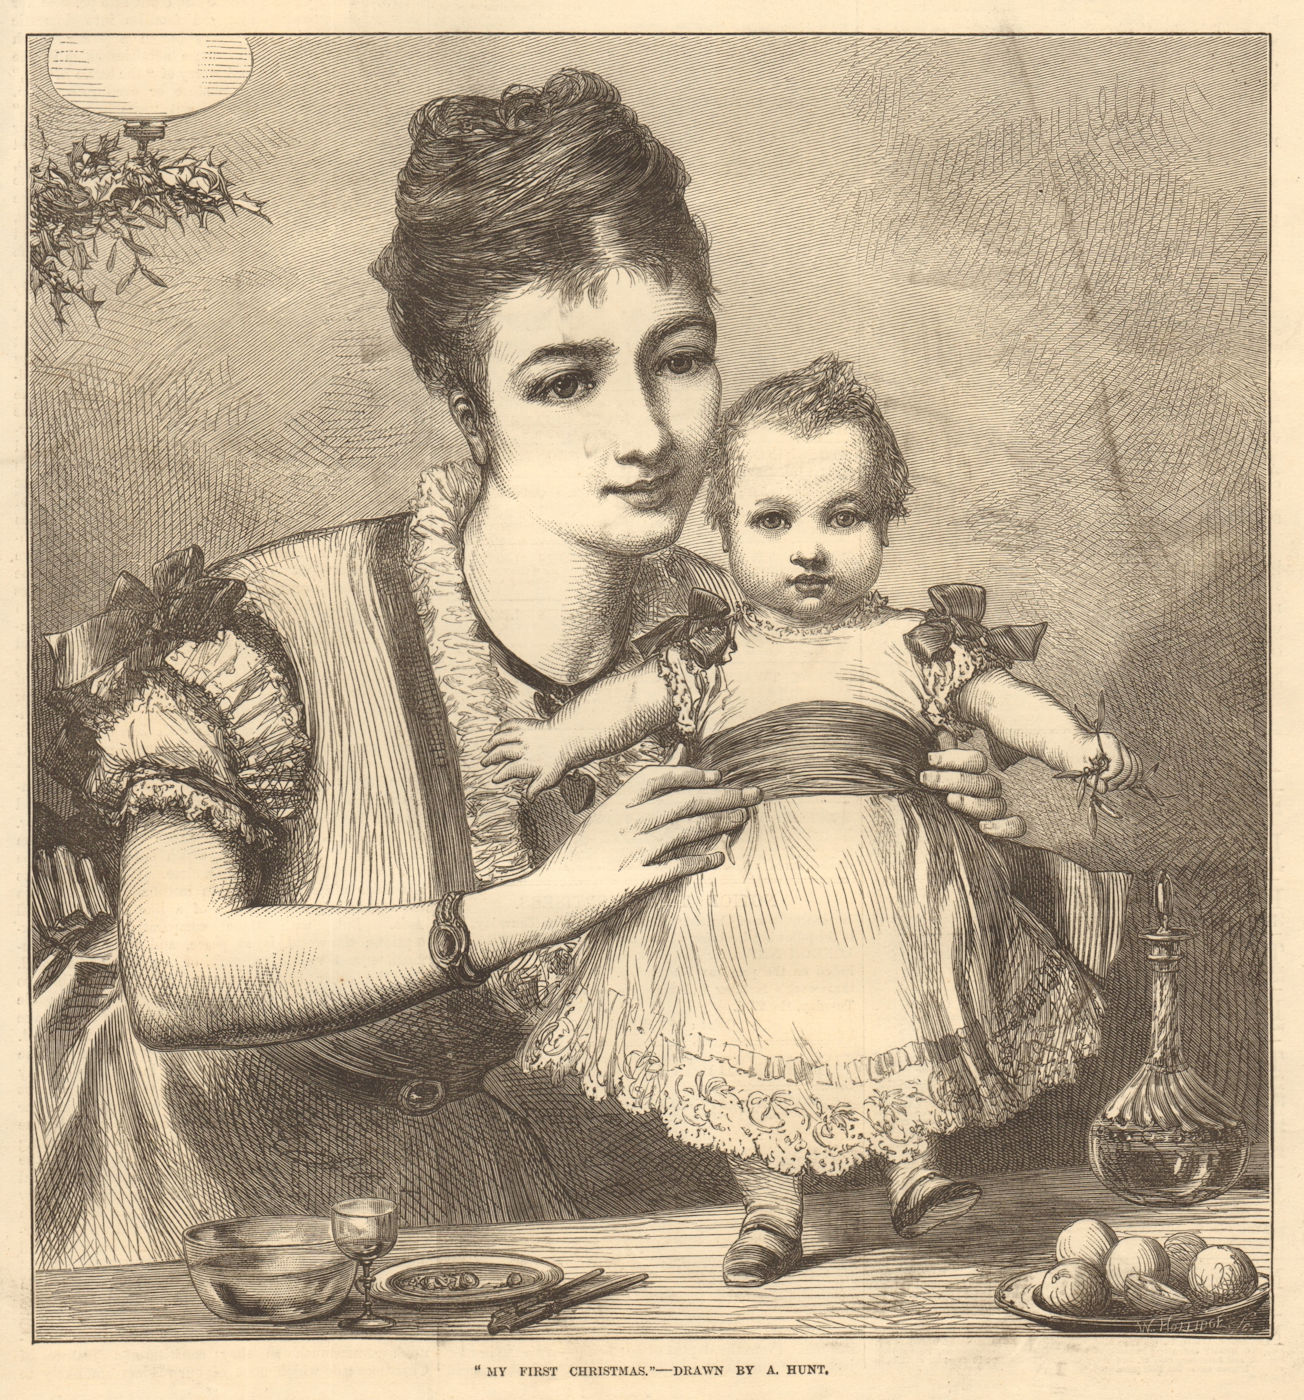 Associate Product "My first Christmas", by A. Hunt. Children baby 1873 antique ILN full page